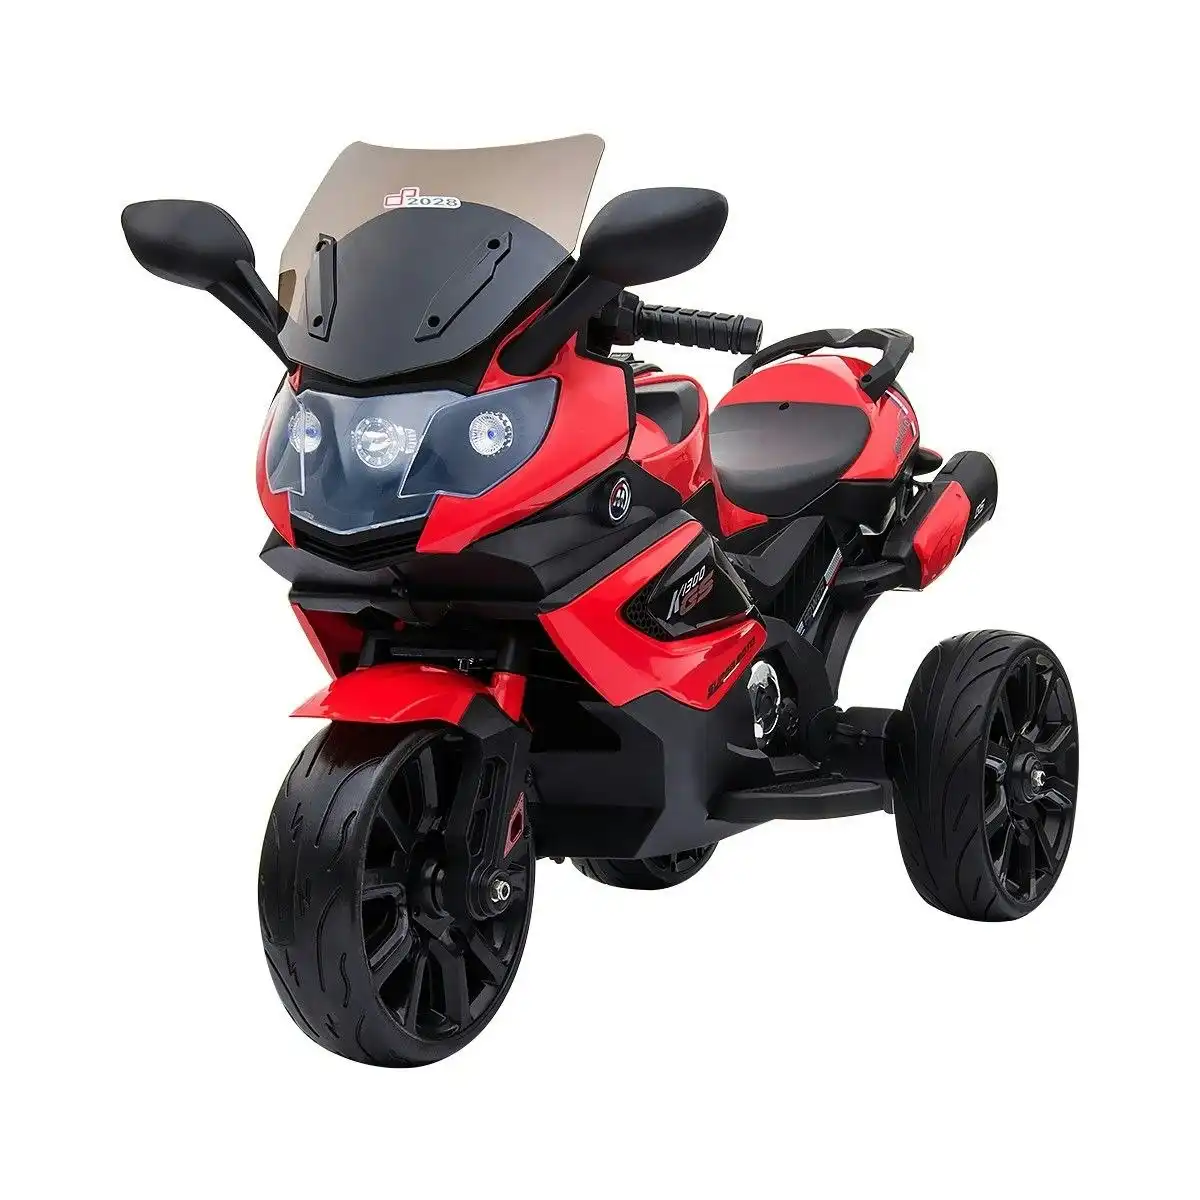 Ausway 20W Pedal Activated Three Wheel Motorbike Ride on Toy for Kids